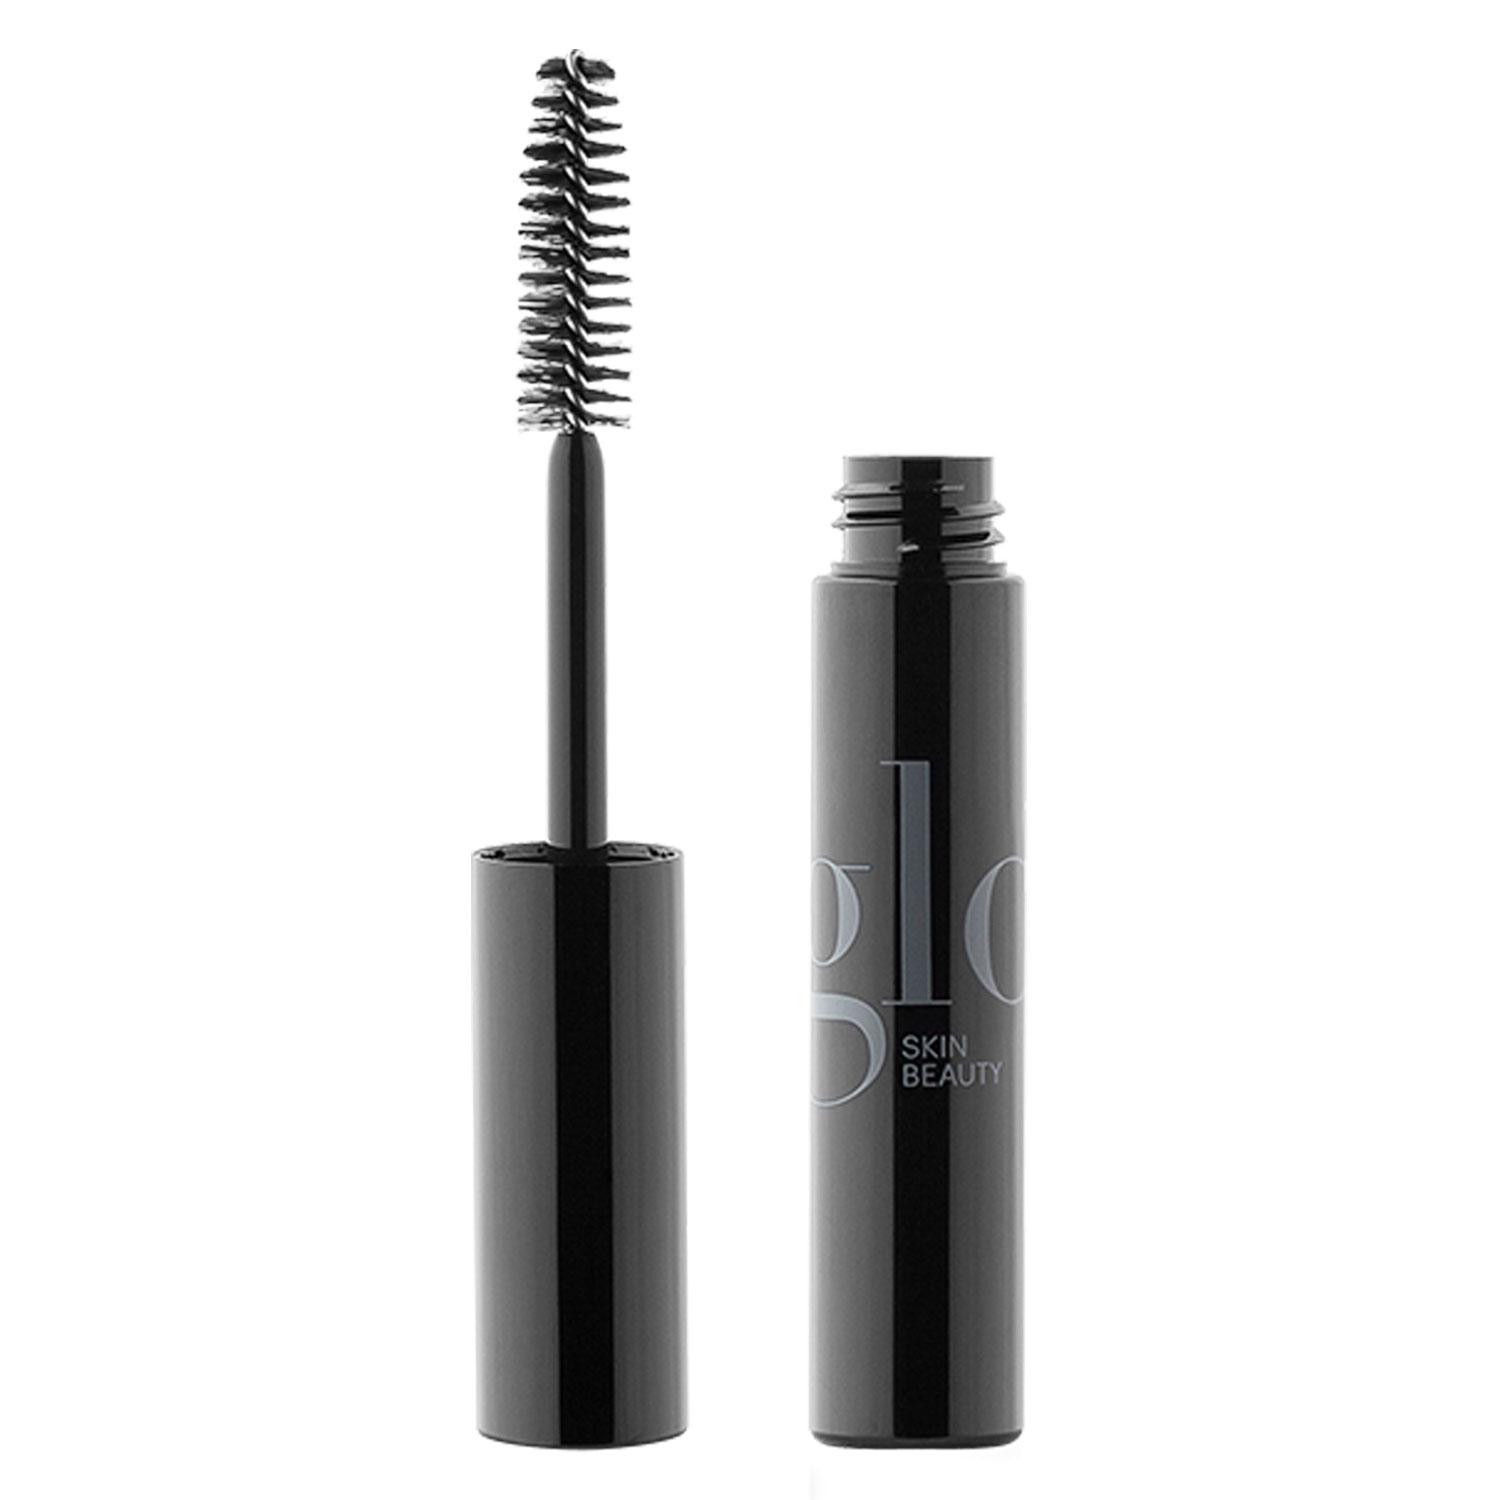 Glo Skin Beauty Mascara - Lash Thickener & Conditioner Colorless